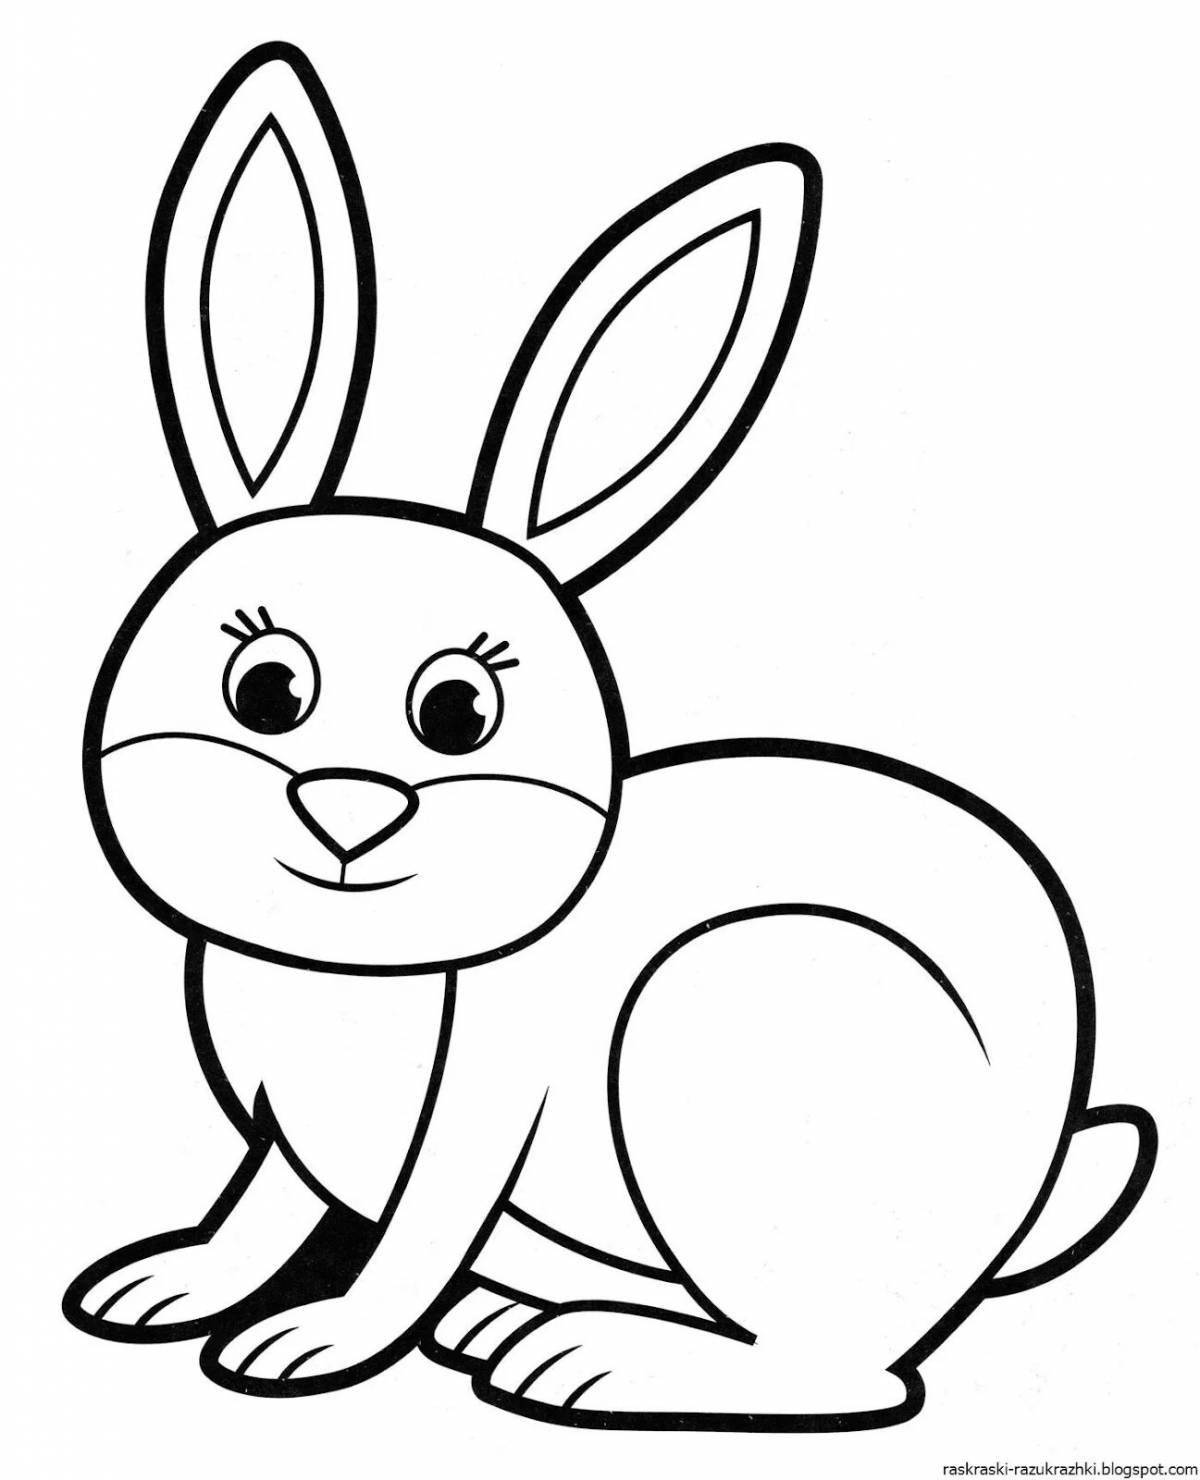 Bunny for children 2 years old #1